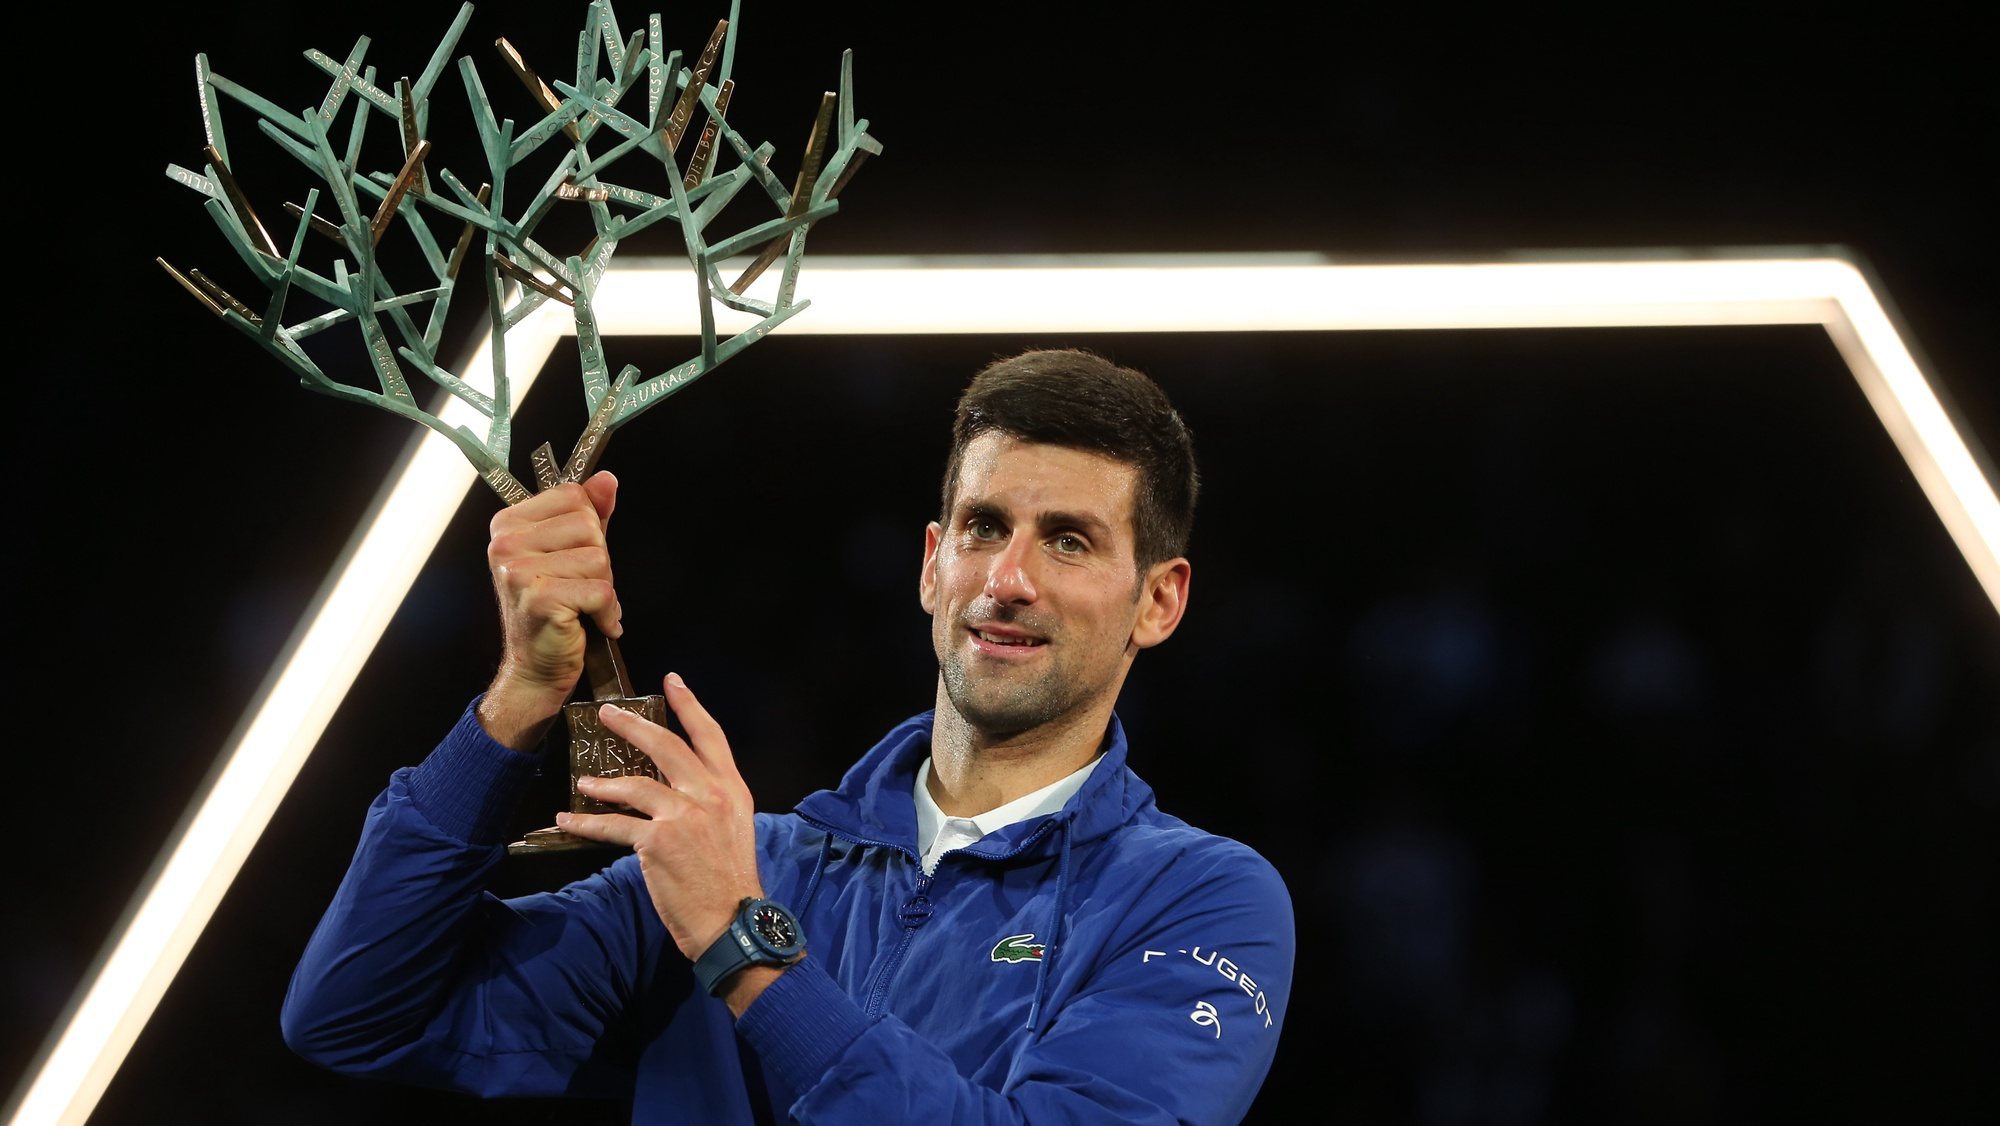 epa09570182 Novak Djokovic of Serbia celebrates with the trophy after winning the final match against Daniil Medvedev of Russia at the Rolex Paris Masters tennis tournament in Paris, France, 07 November 2021.  EPA/CHRISTOPHE PETIT TESSON